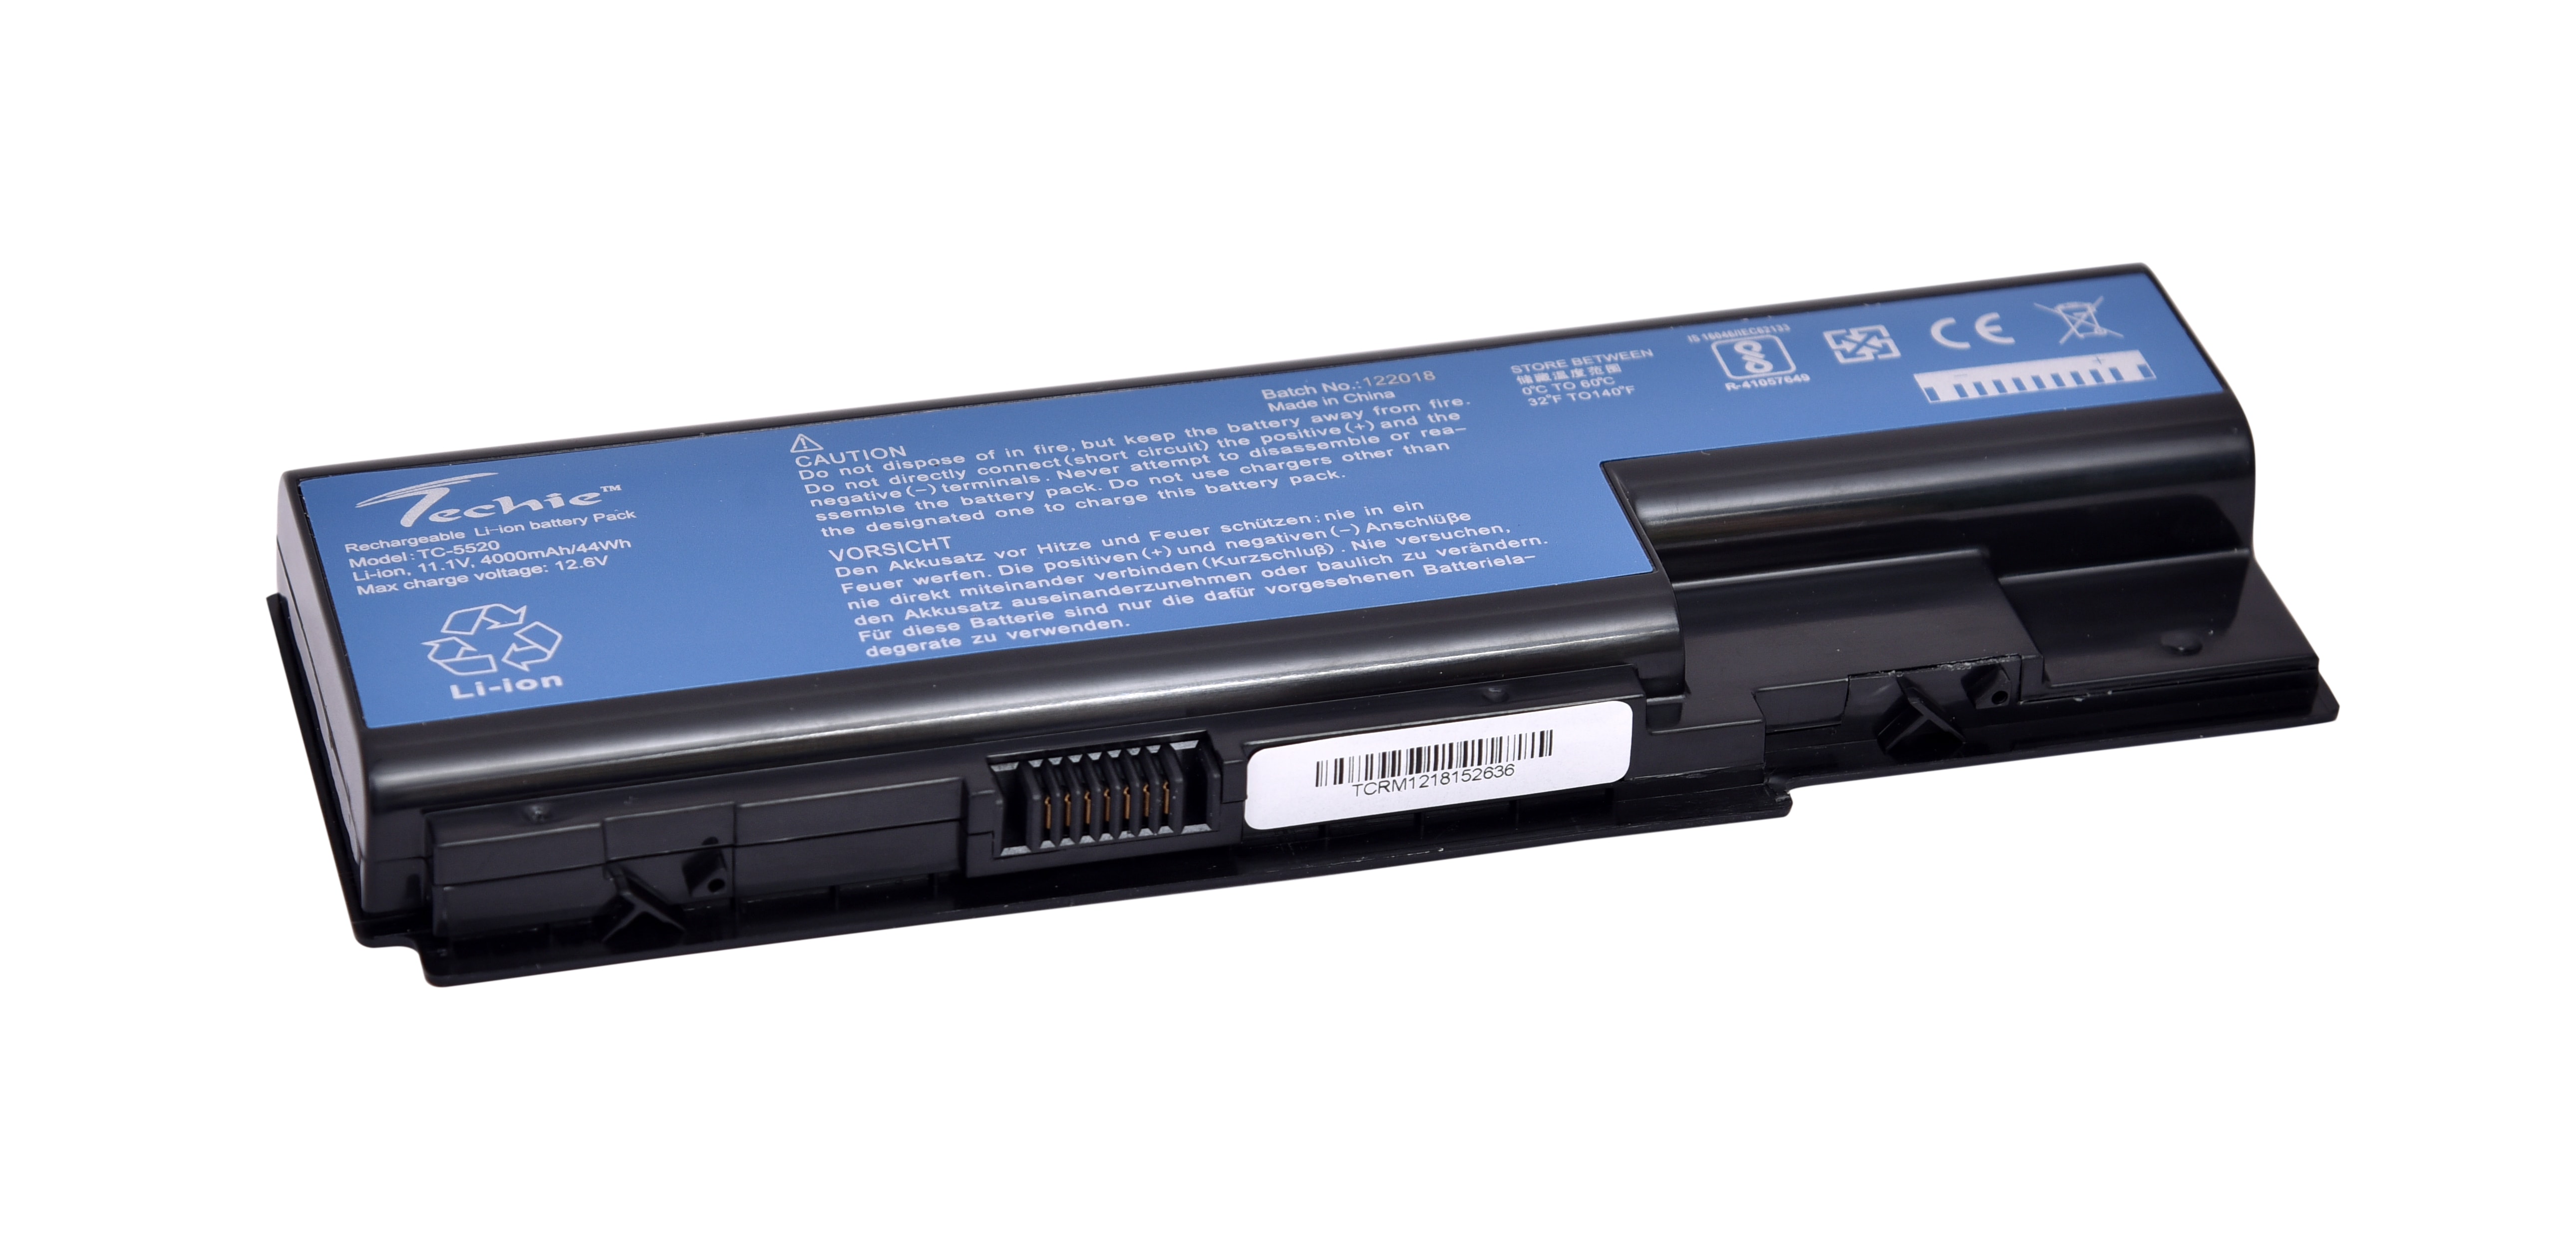 Intend segment Young lady High Quality Acer 5520 Battery For Acer Aspire 5320, Aspire 5520 Series,  Aspire 5710 Series, Aspire 5720 Series Laptops.